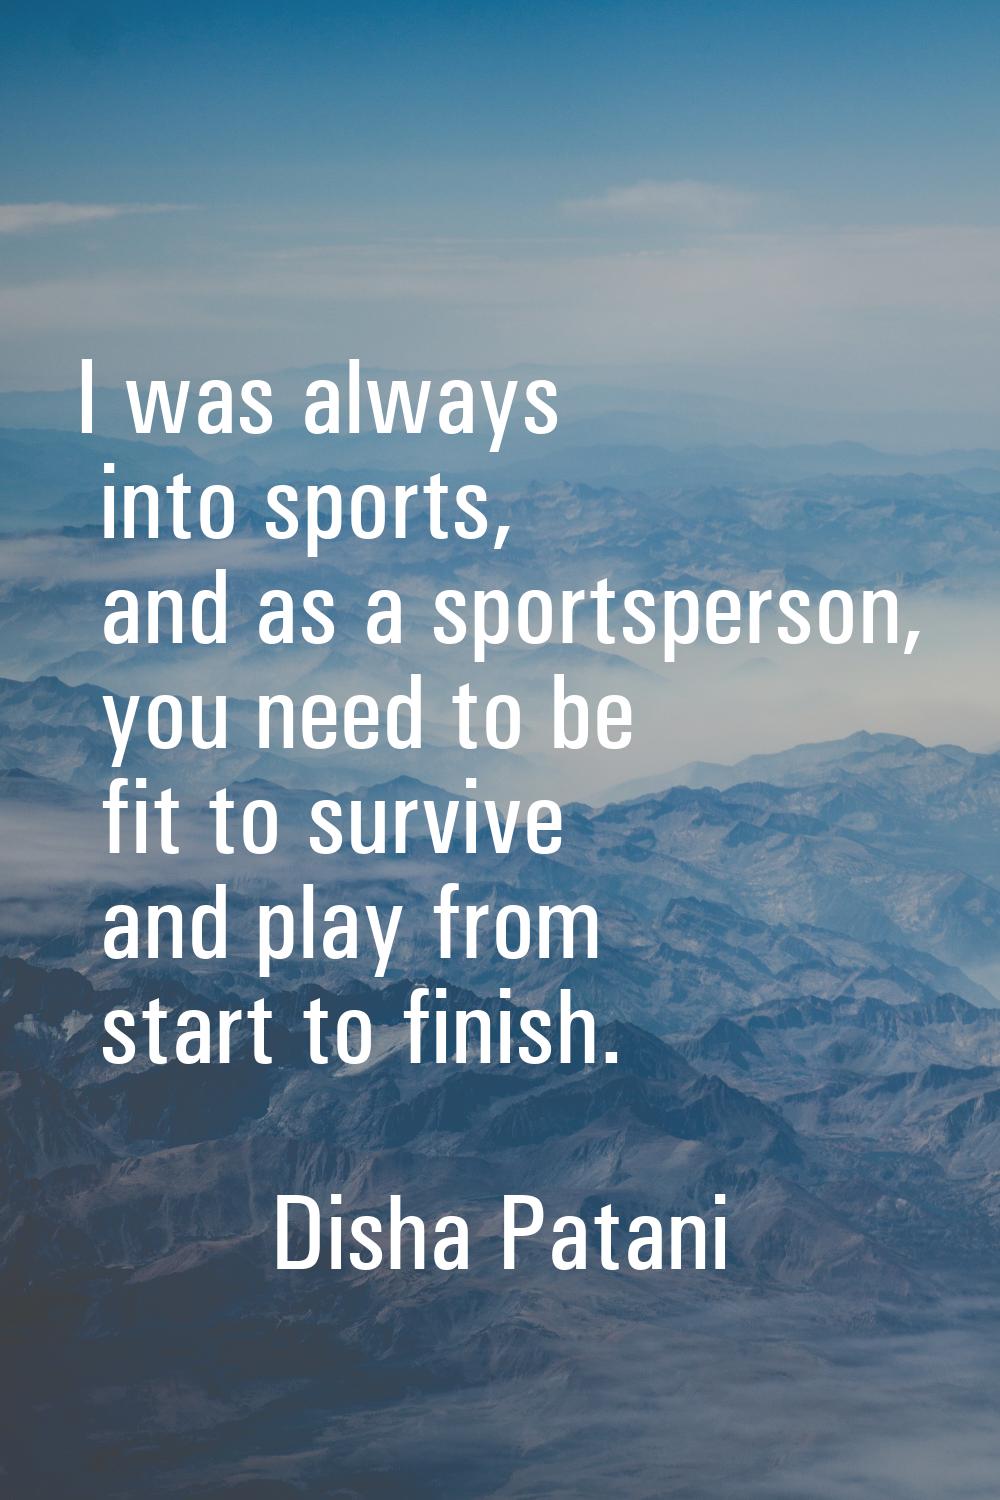 I was always into sports, and as a sportsperson, you need to be fit to survive and play from start 